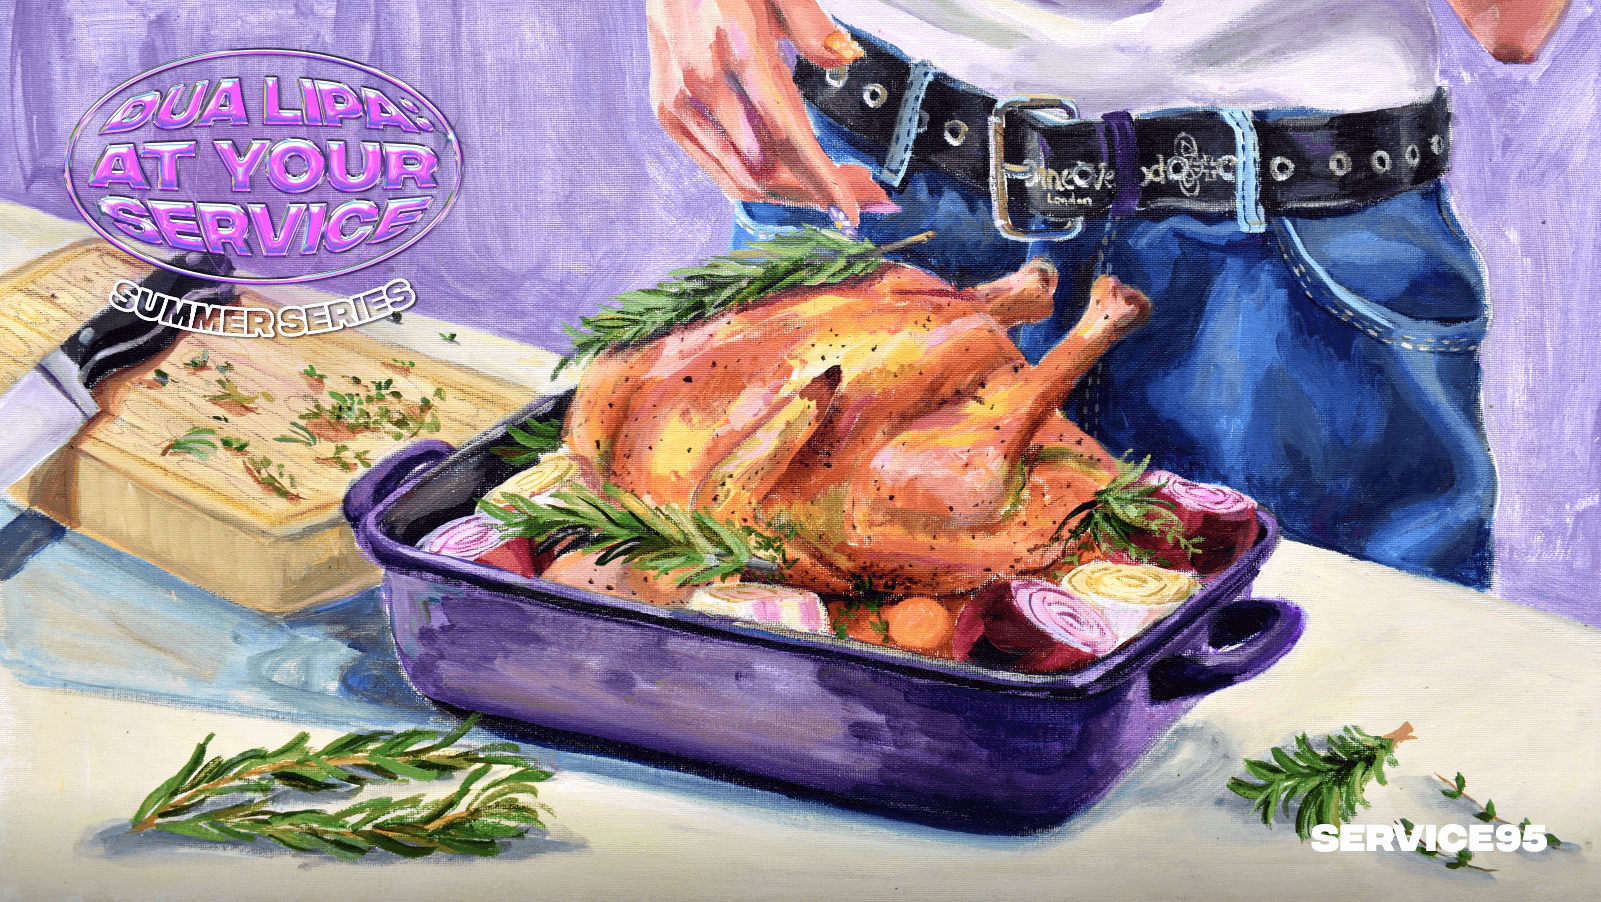 Illustration of Dua Lipa and her famous roast chicken